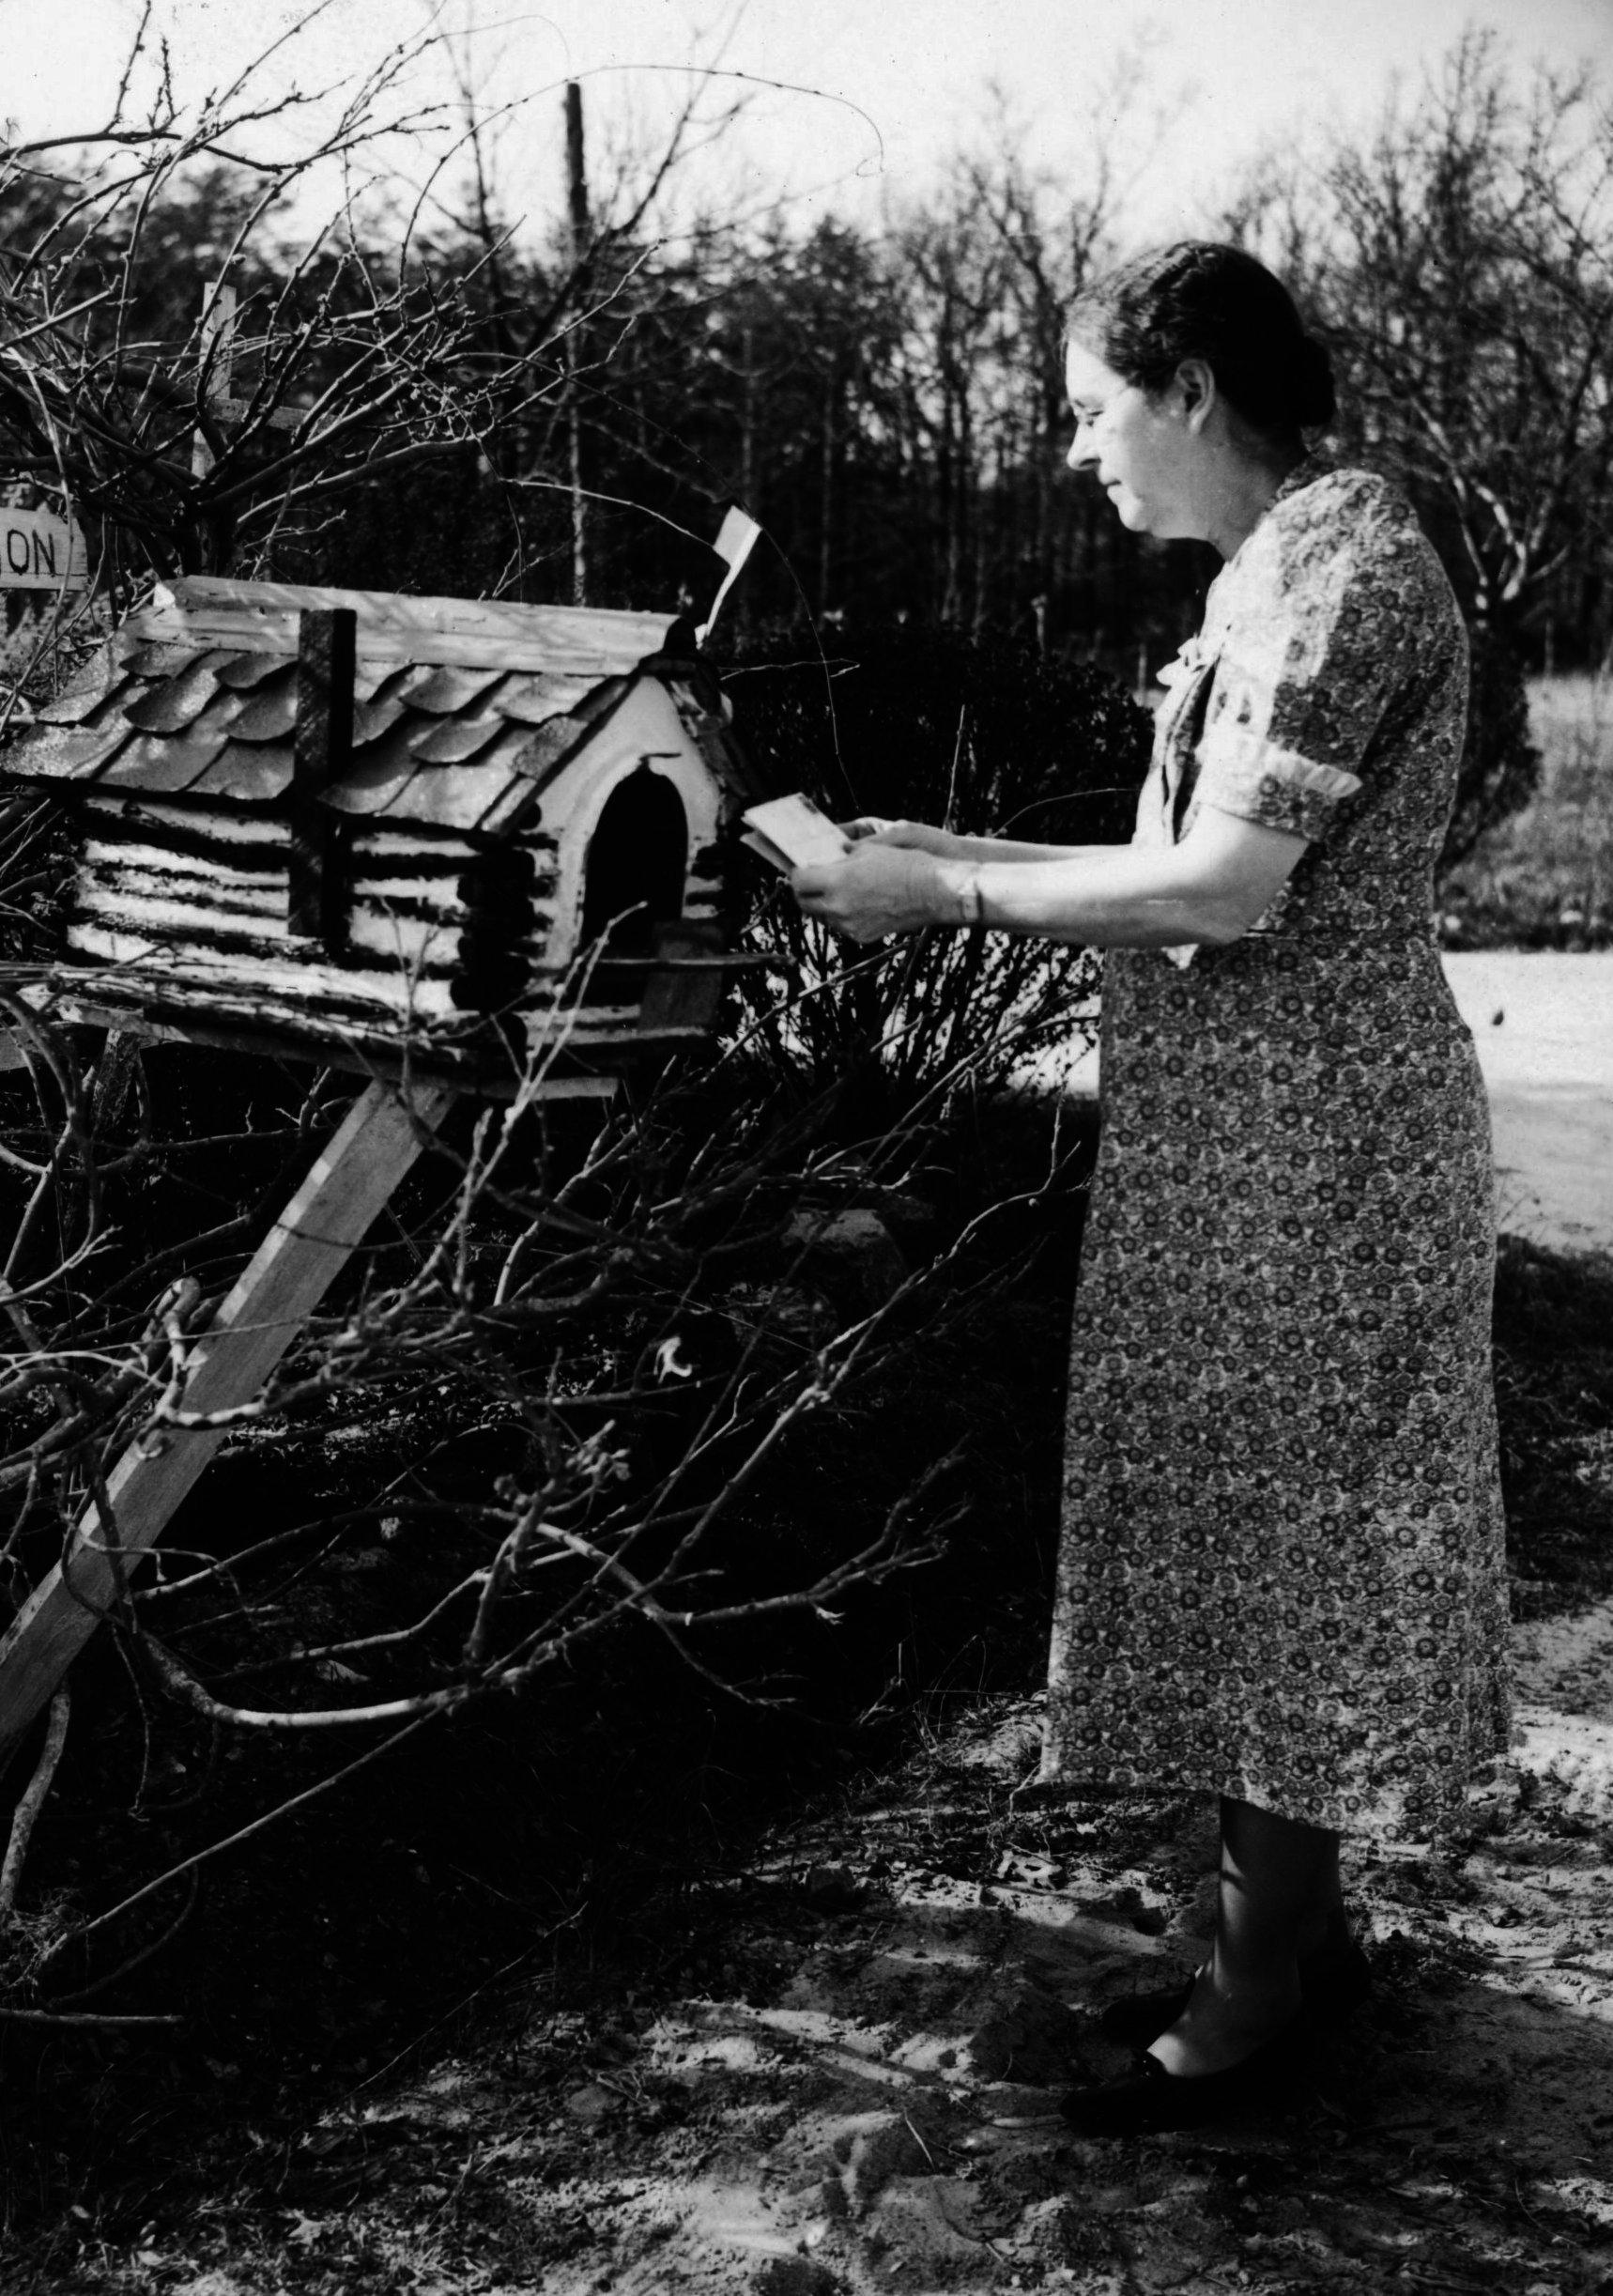 Ruth is checking the letter at her mailbox.